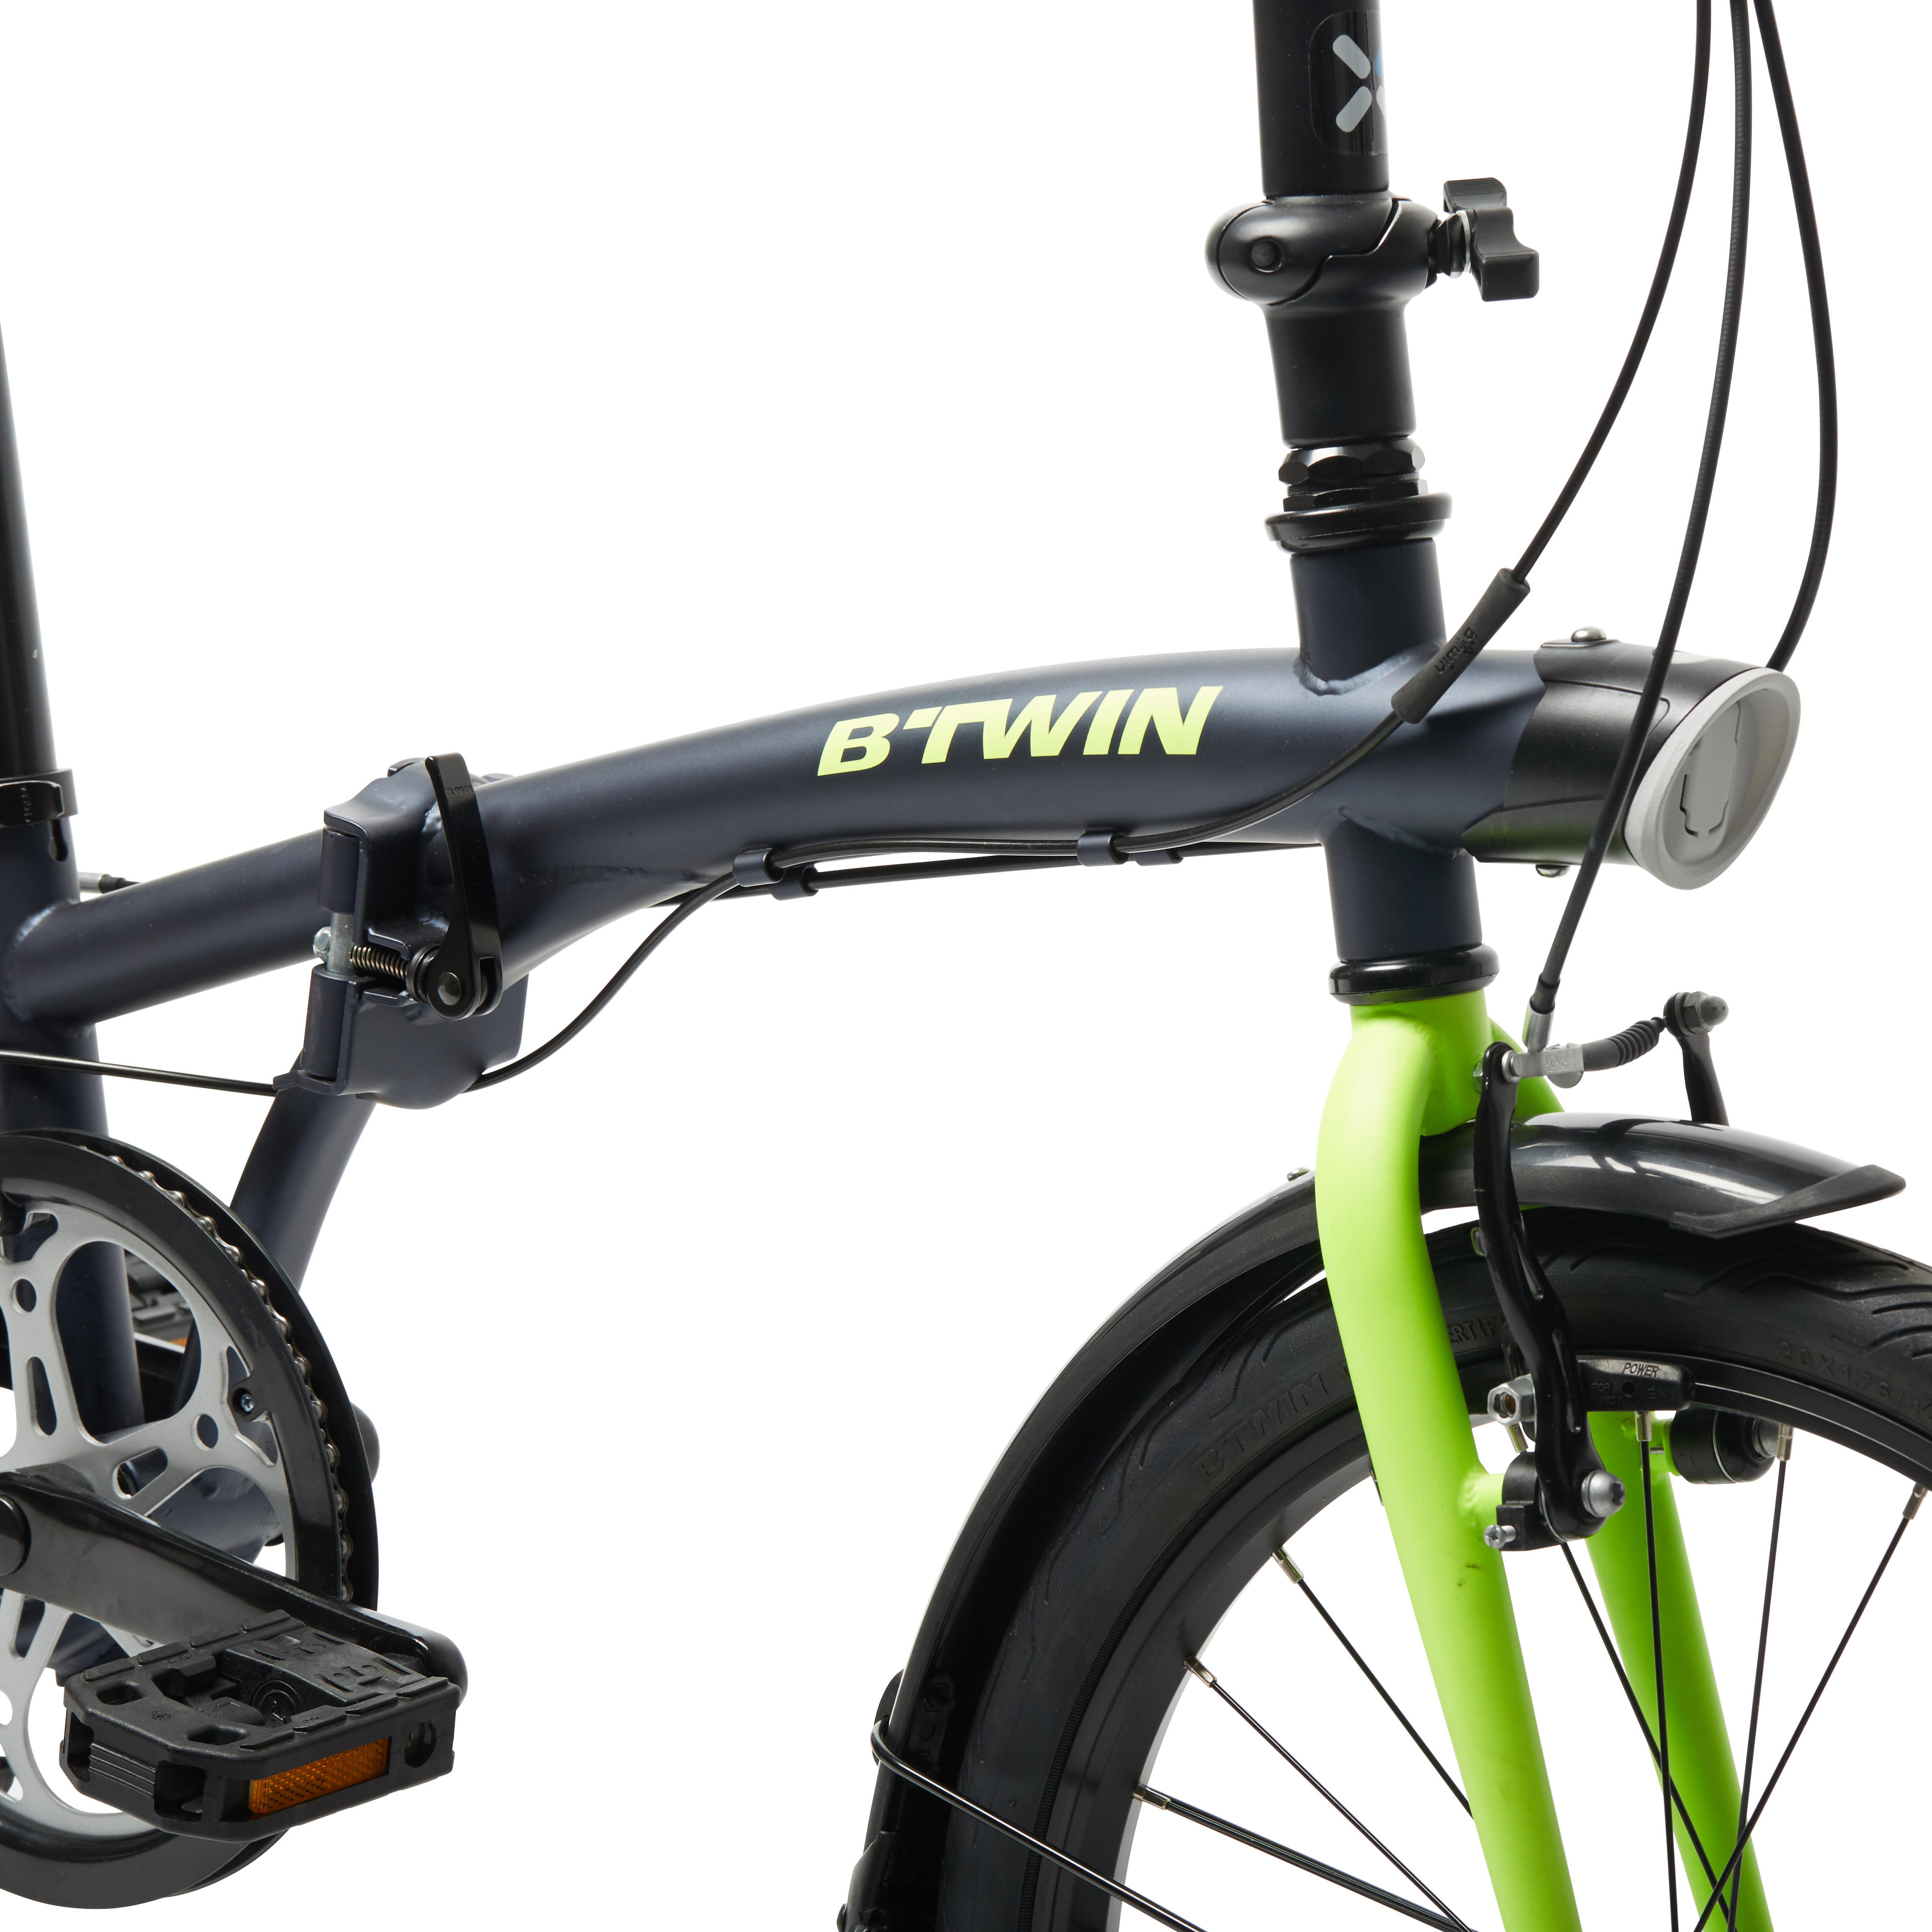 btwin hoptown 320 price